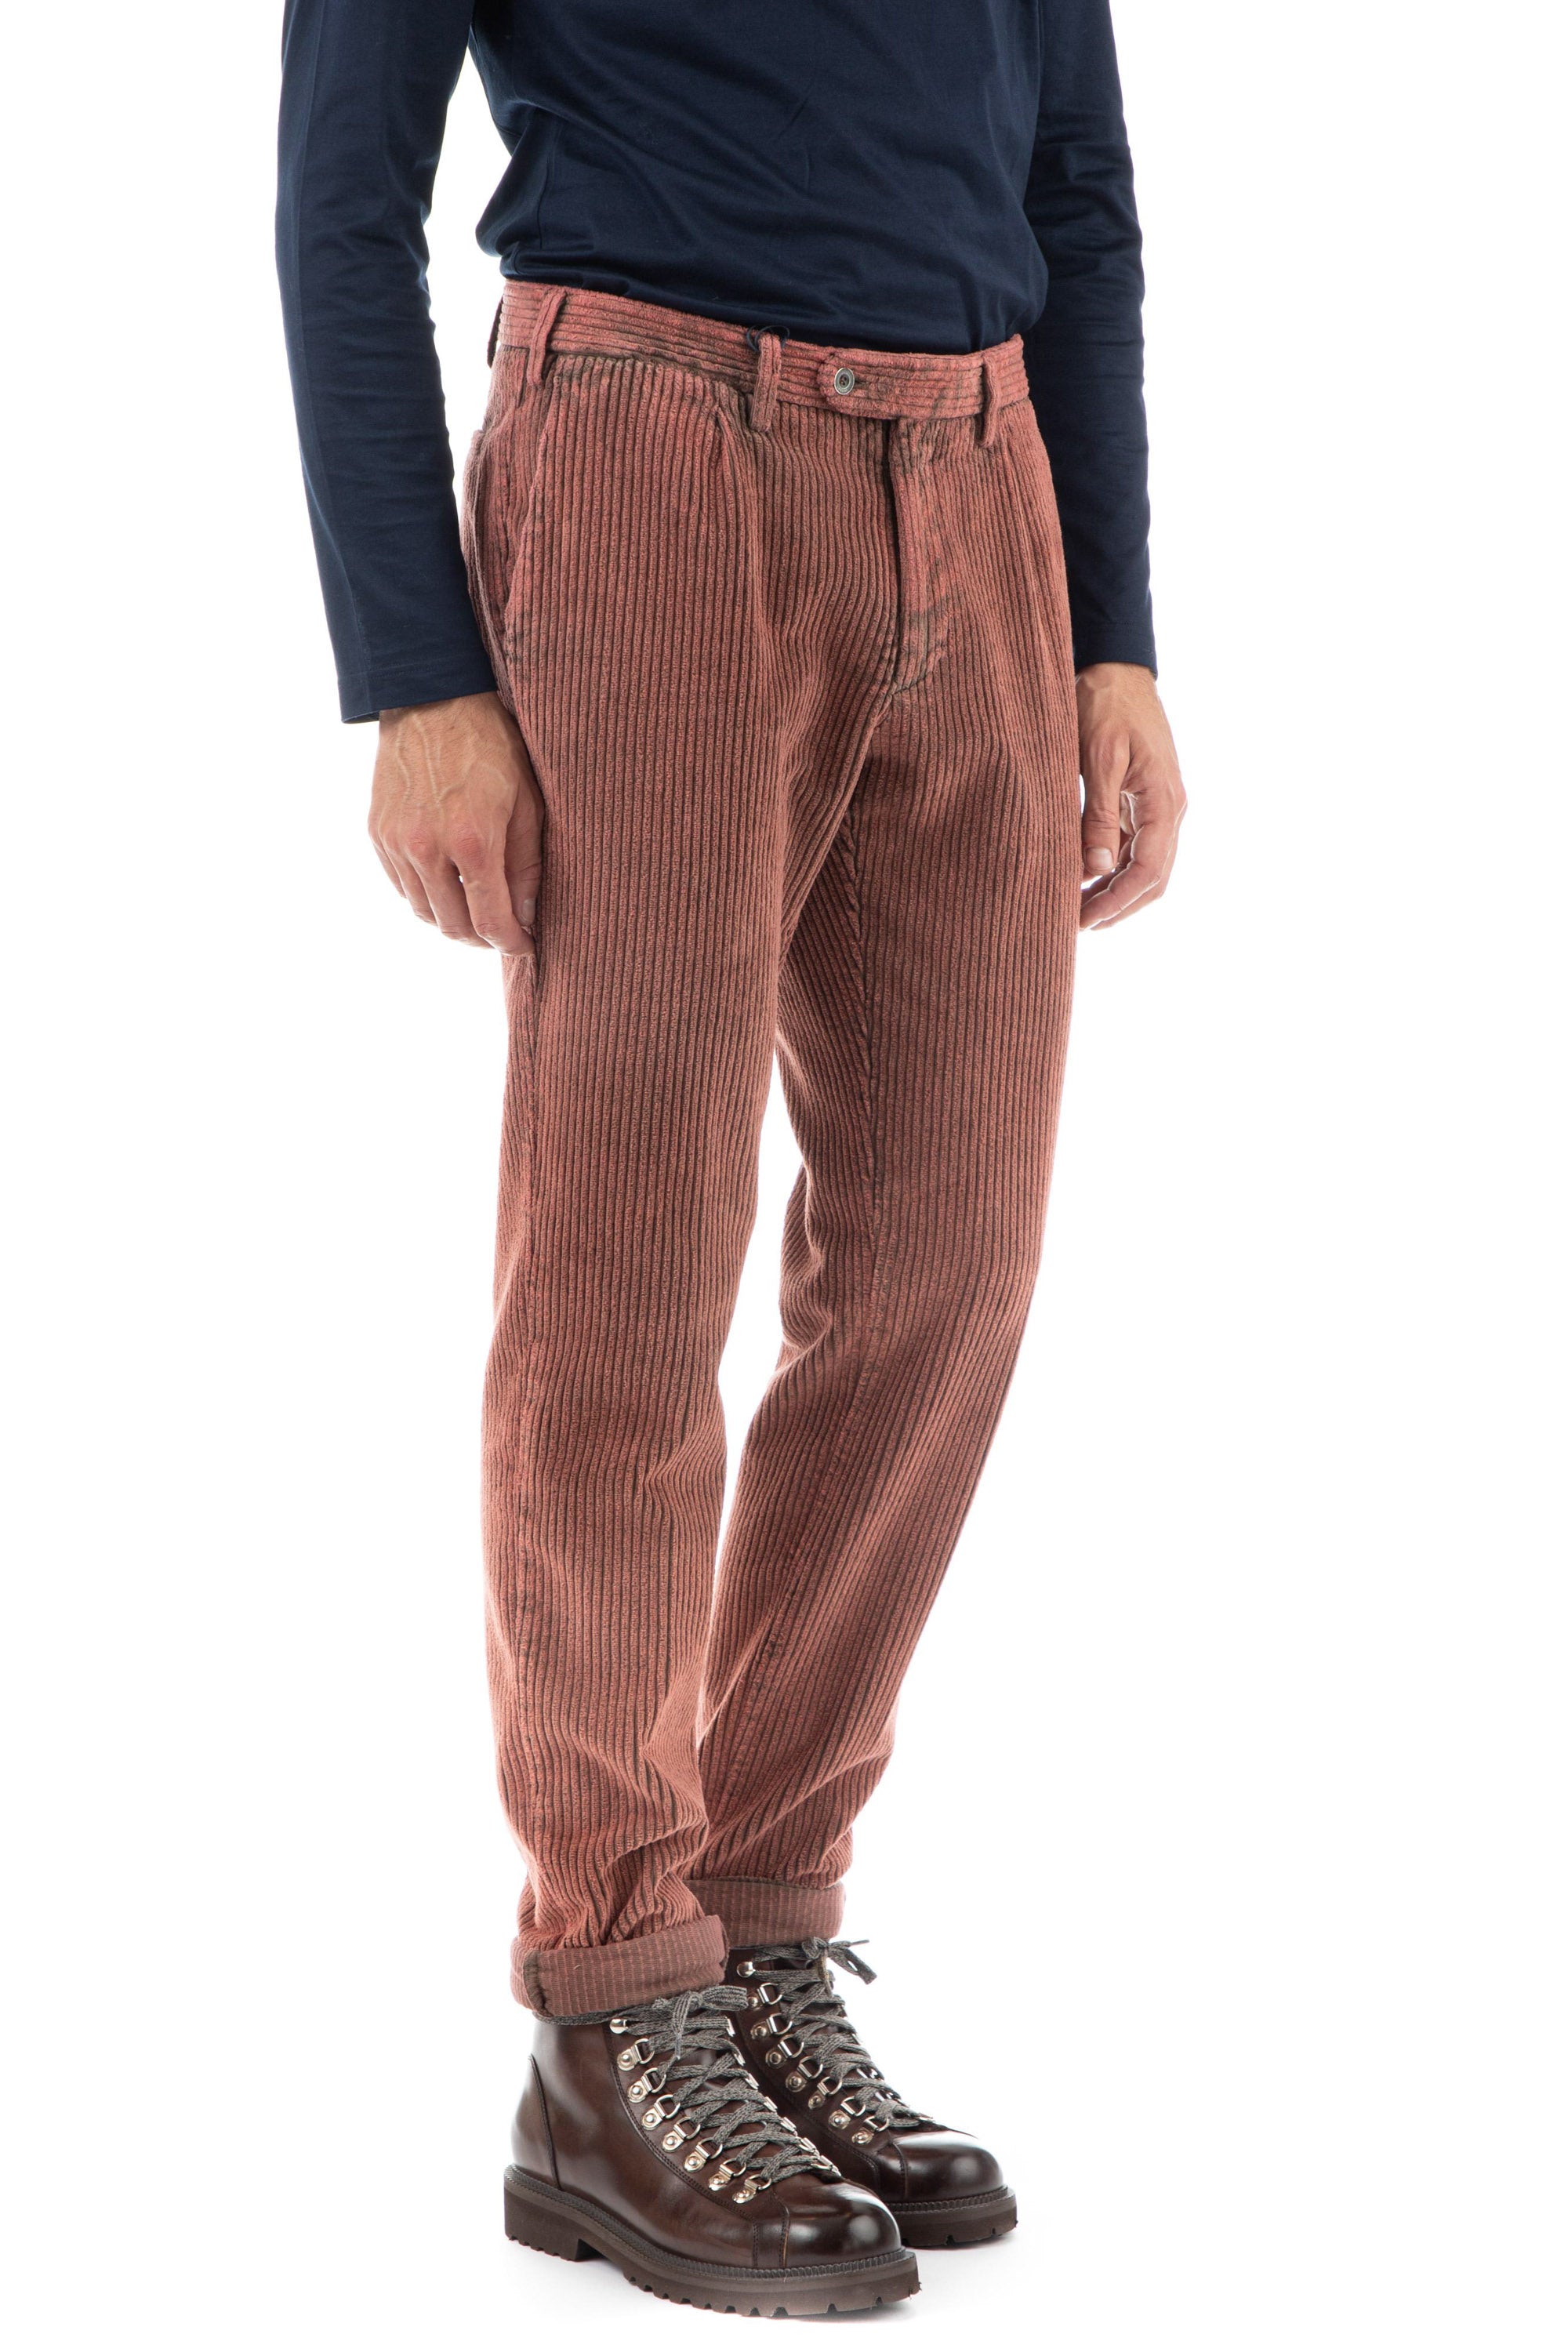 Poorly dyed corduroy trousers